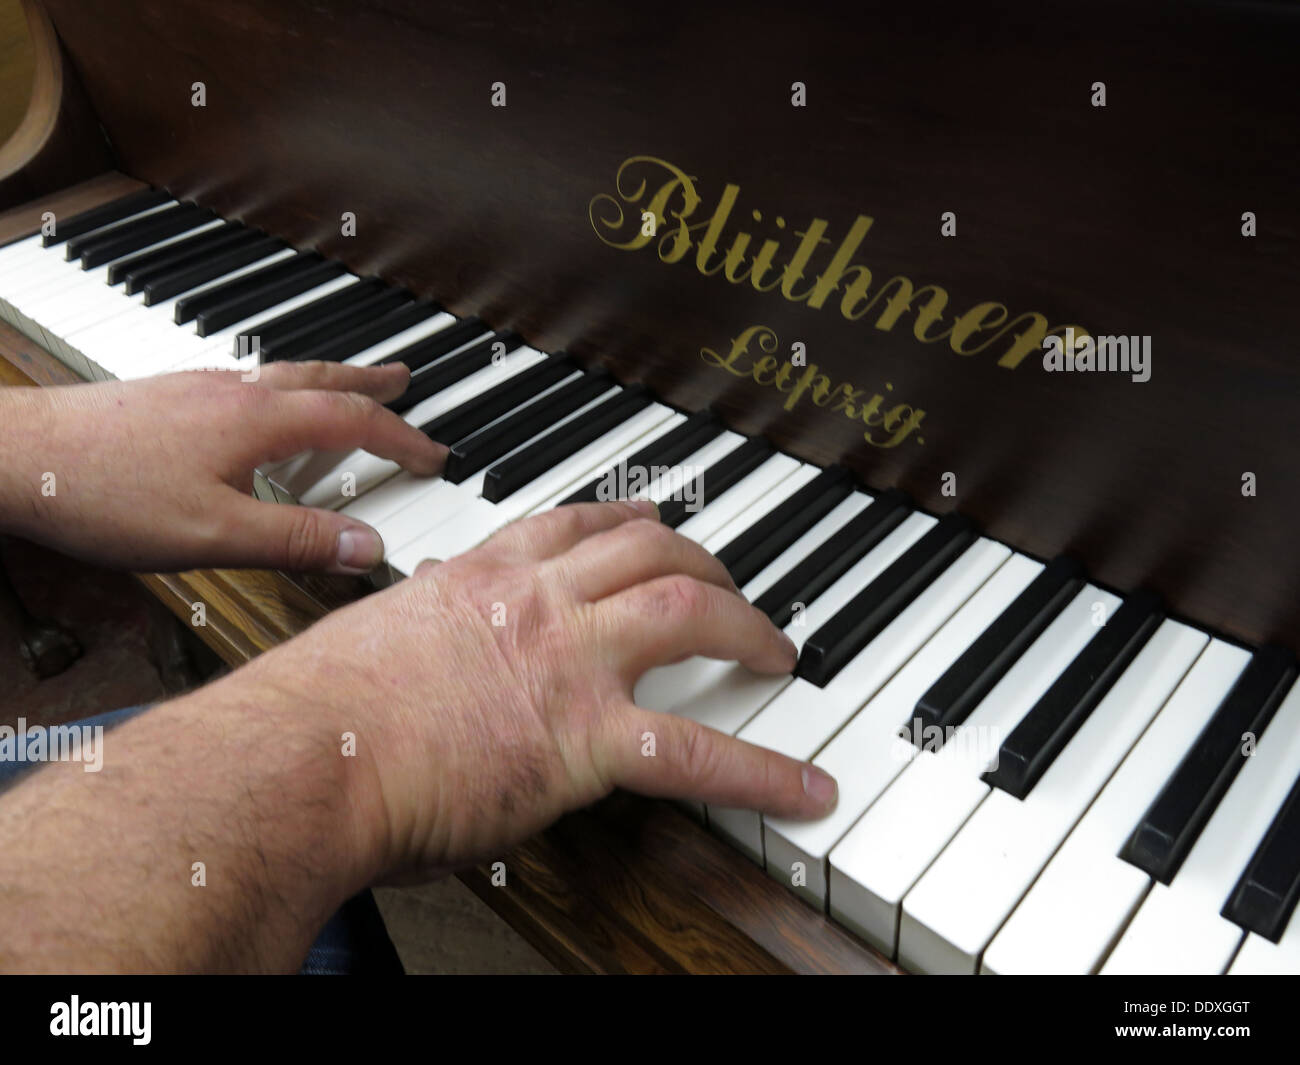 Playing a Bluthner Piano,Liepzig,Germany Stock Photo